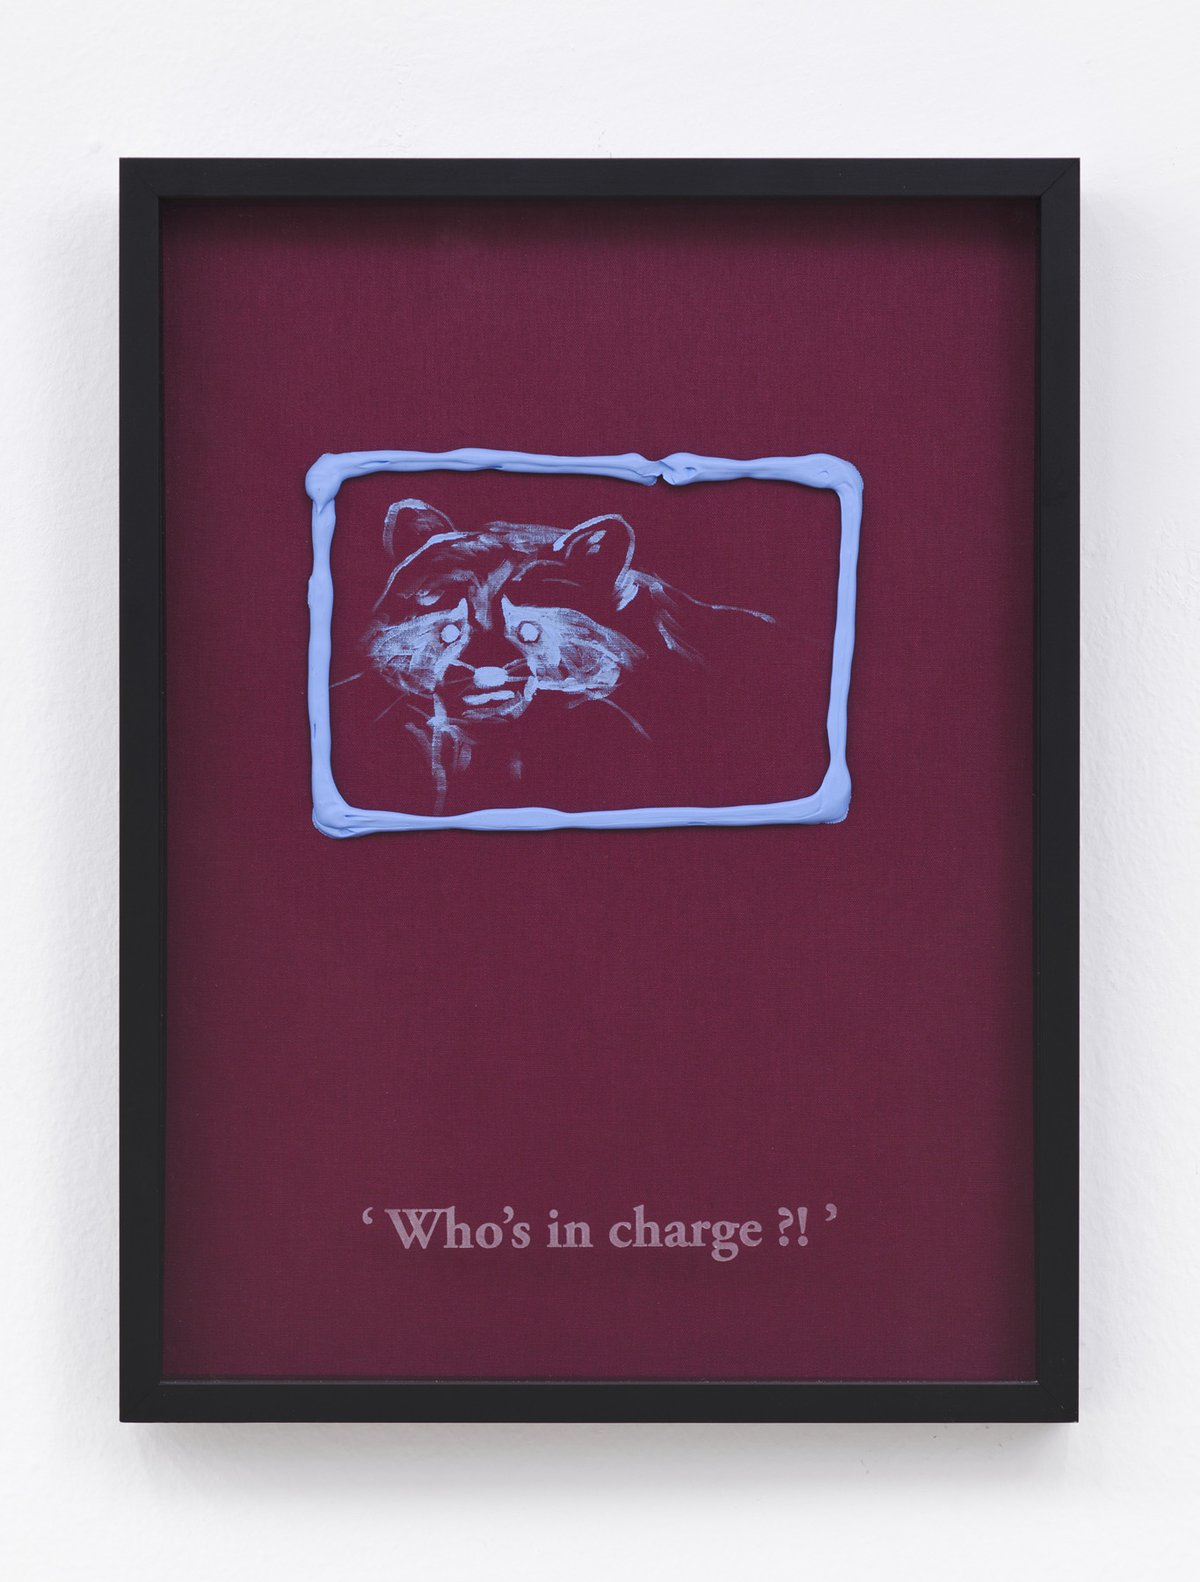 Philipp Timischl&quot;Who&#x27;s in charge?!&quot; (Burgundy/Royal Blue Light), 2017Acrylic on linen and glass-engraved object frame40.1 x 32.1 cm